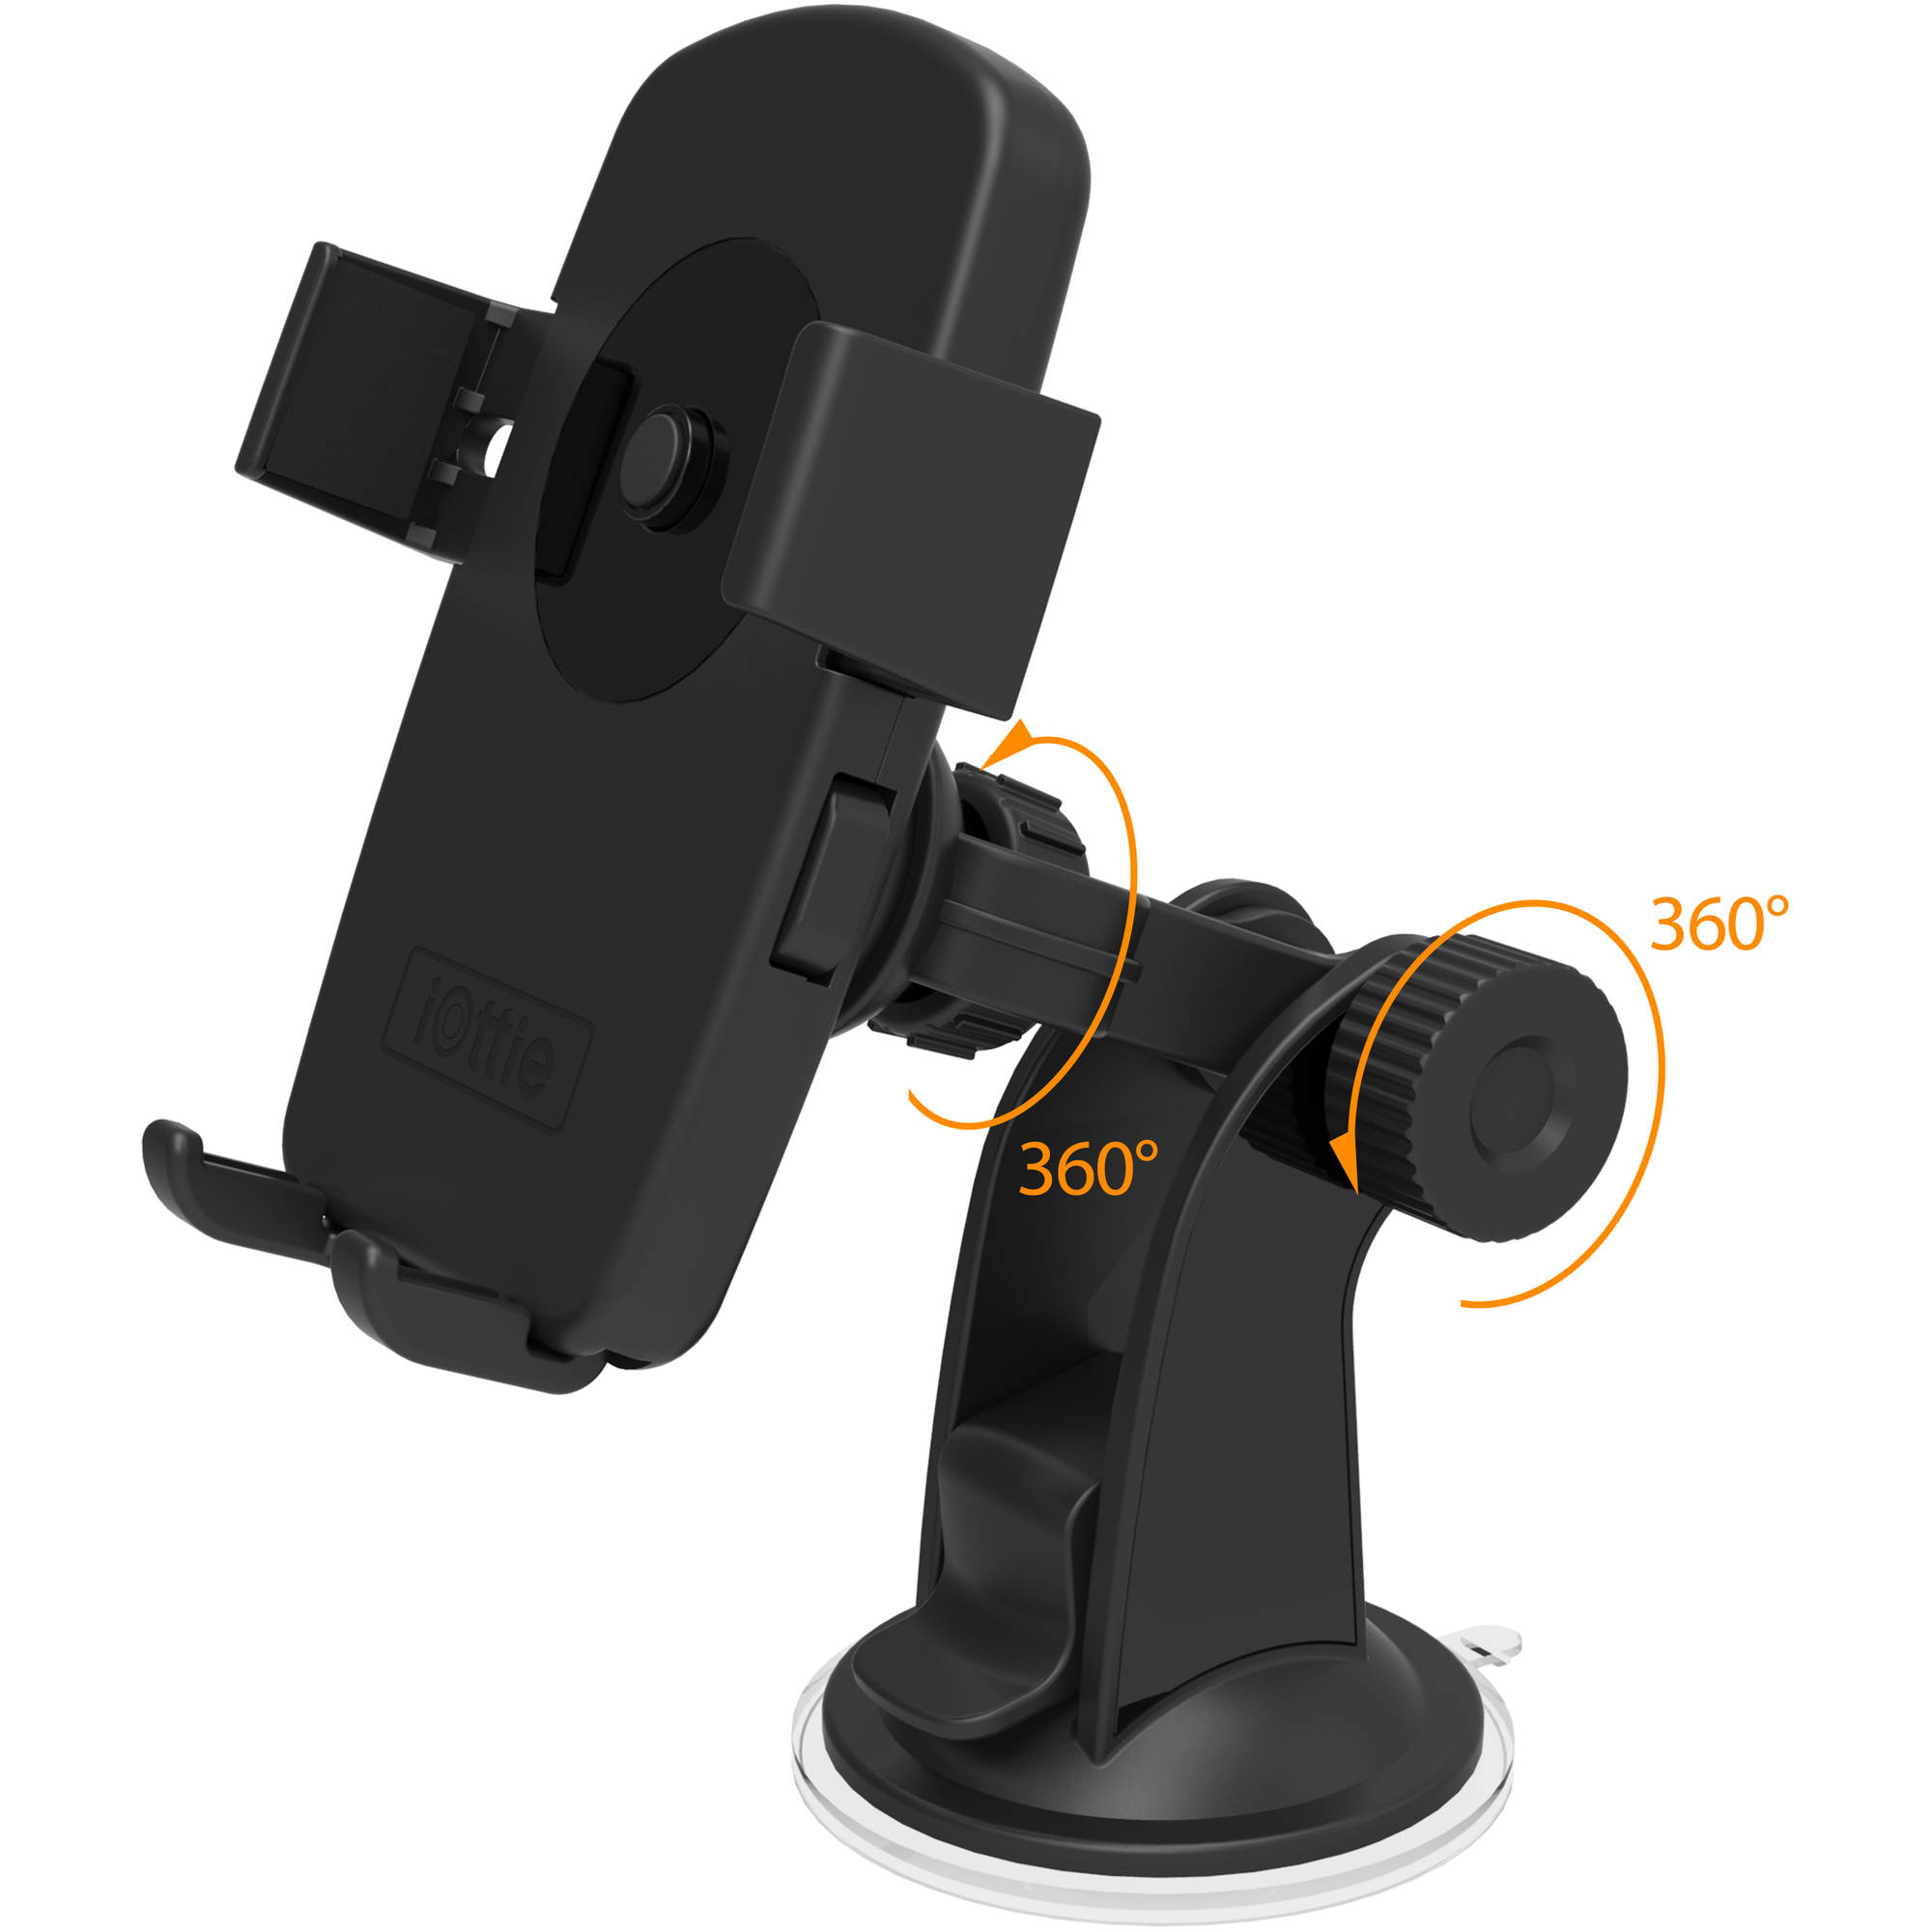 iOttie Easy One Touch Windshield Dashboard Car Mount Holder for iPhone 7/6s/6, Galaxy S8/S7- Retail Packaging- Black - image 3 of 6